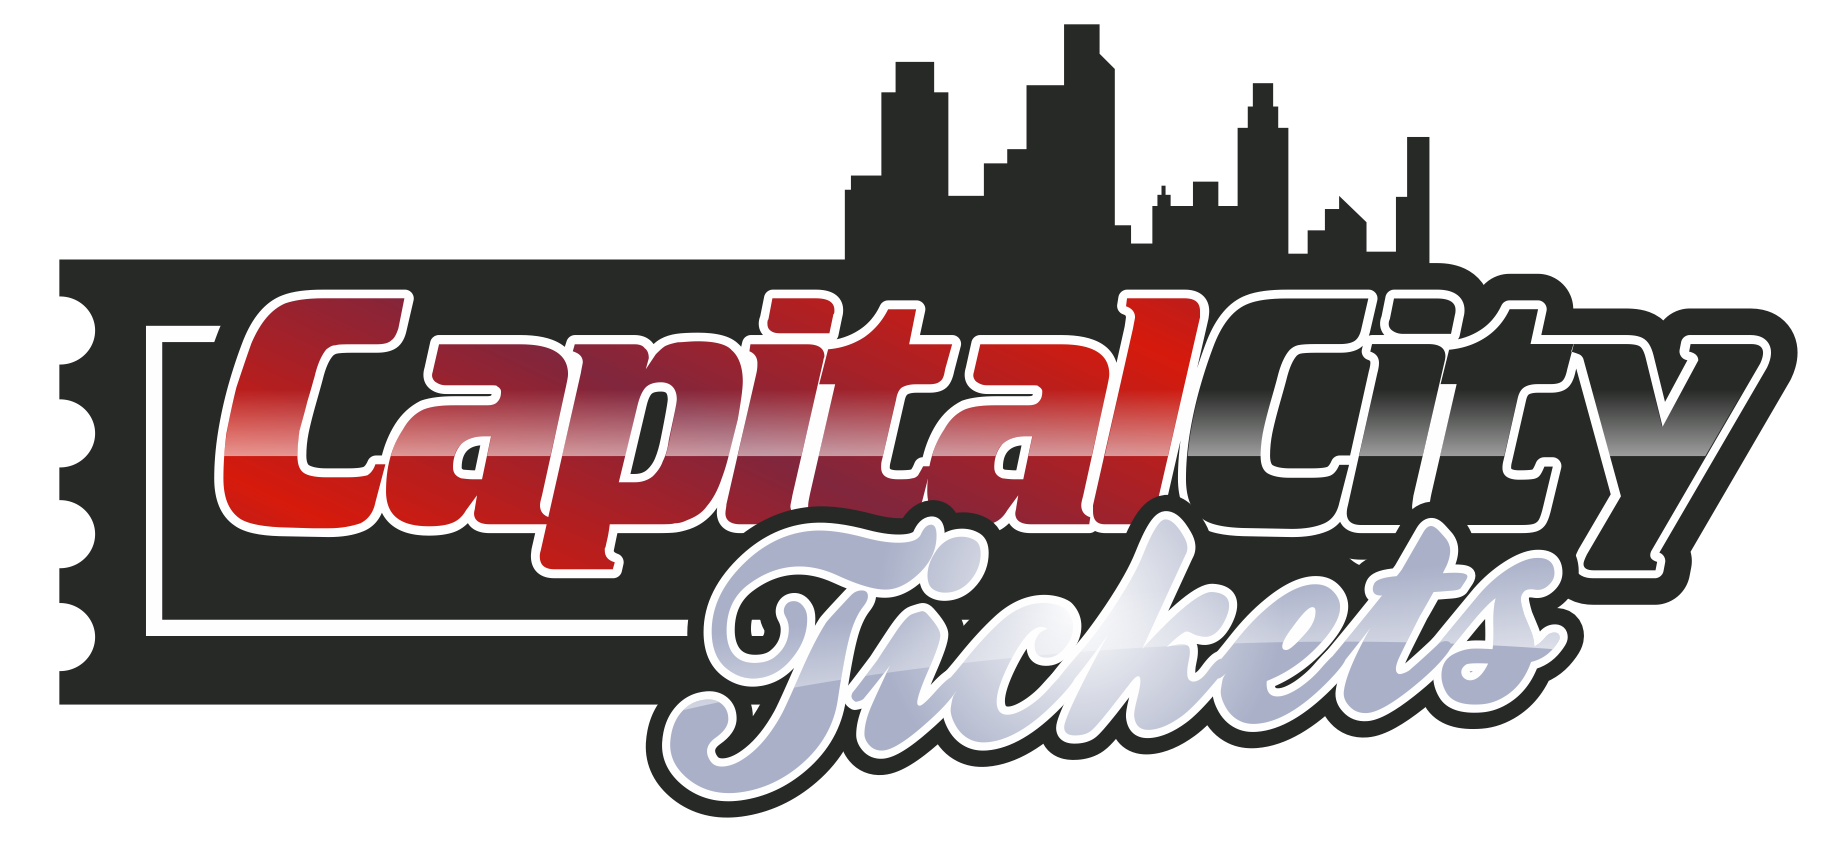 Discount Stanford Cardinal Lower Level Tickets, Upper Level Seating, Club Seats, and Parking for their 2018 College Football Games at Capital City Tickets with Promo Code 2